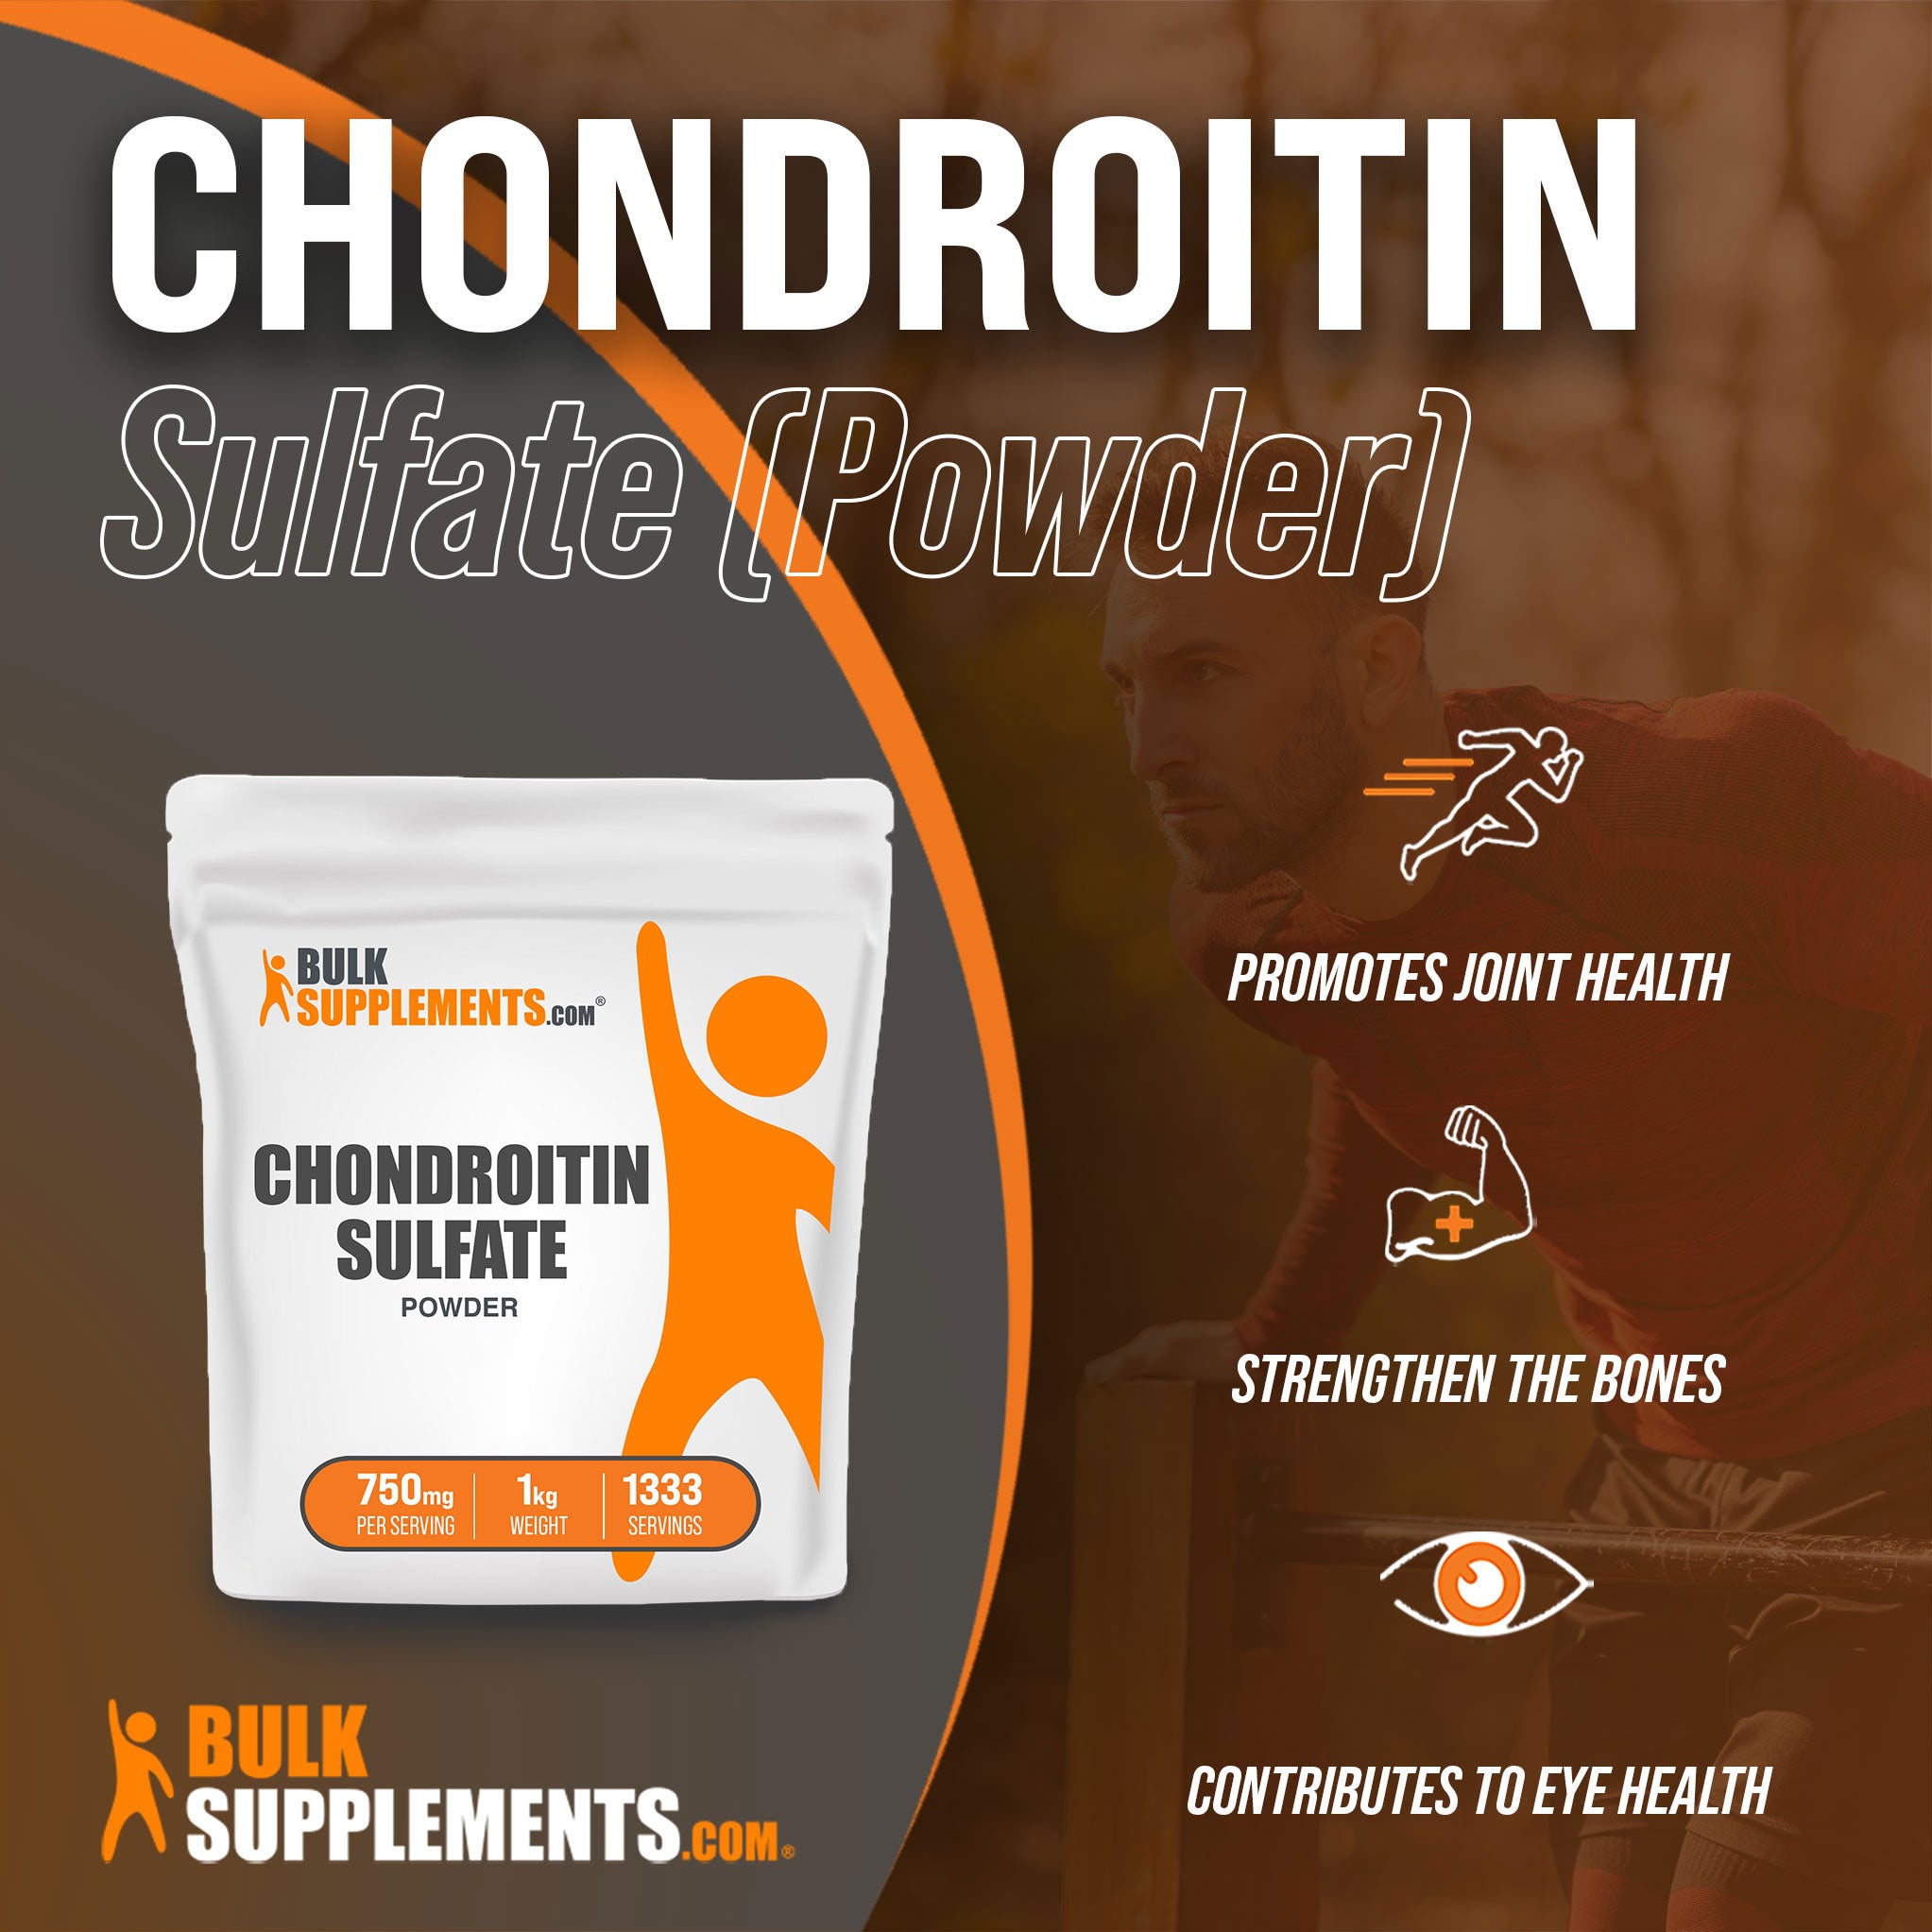 Benefits of 1kg Chondroitin Sulfate Powder; joint support supplement, strengthen the bones, contributes to eye health